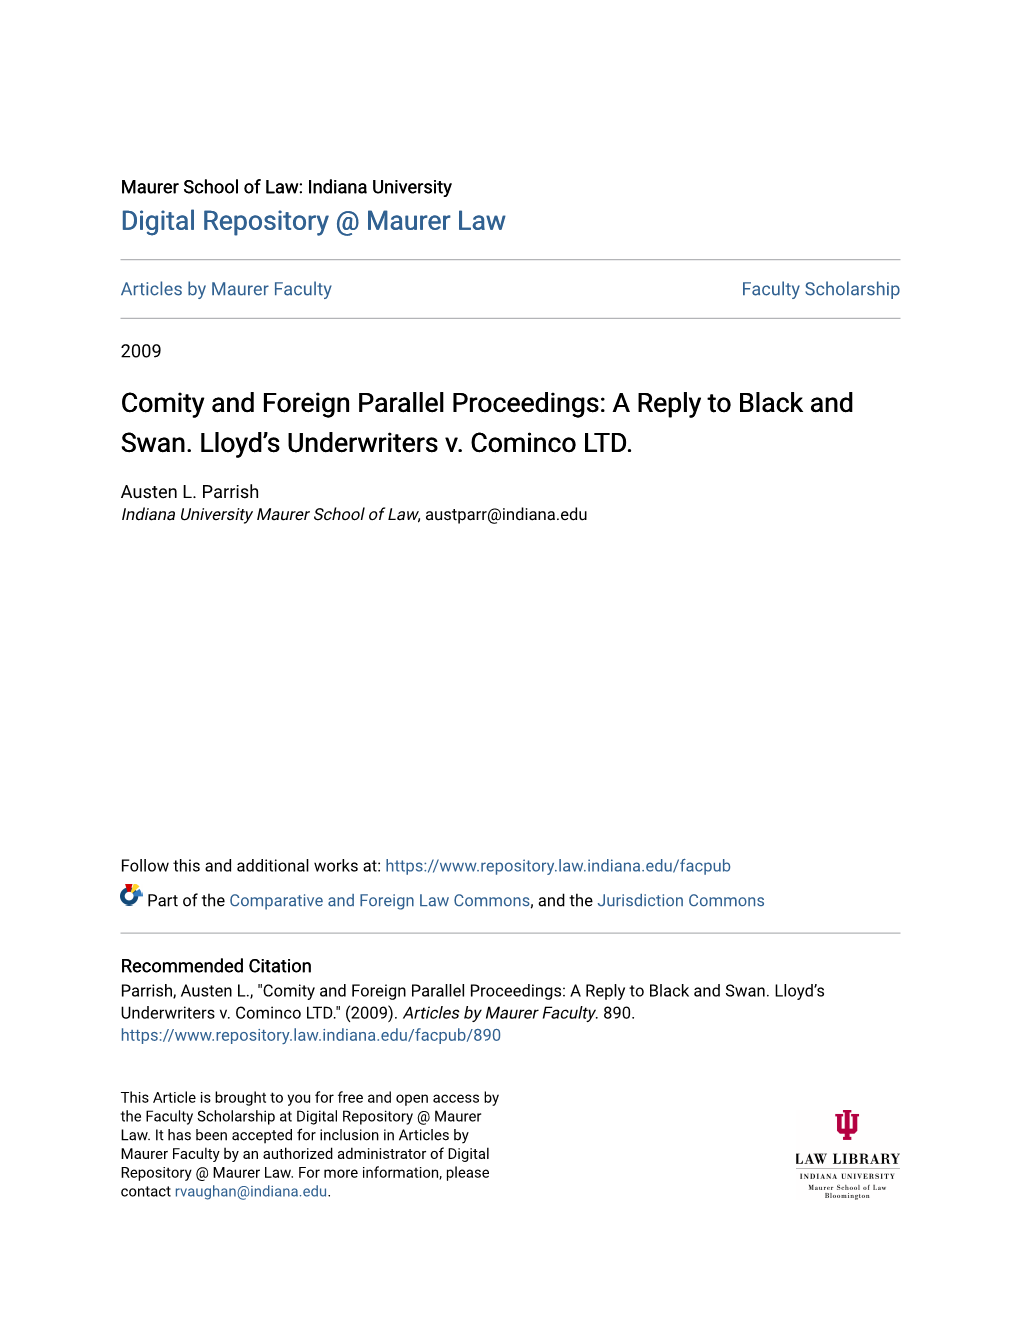 Comity and Foreign Parallel Proceedings: a Reply to Black and Swan